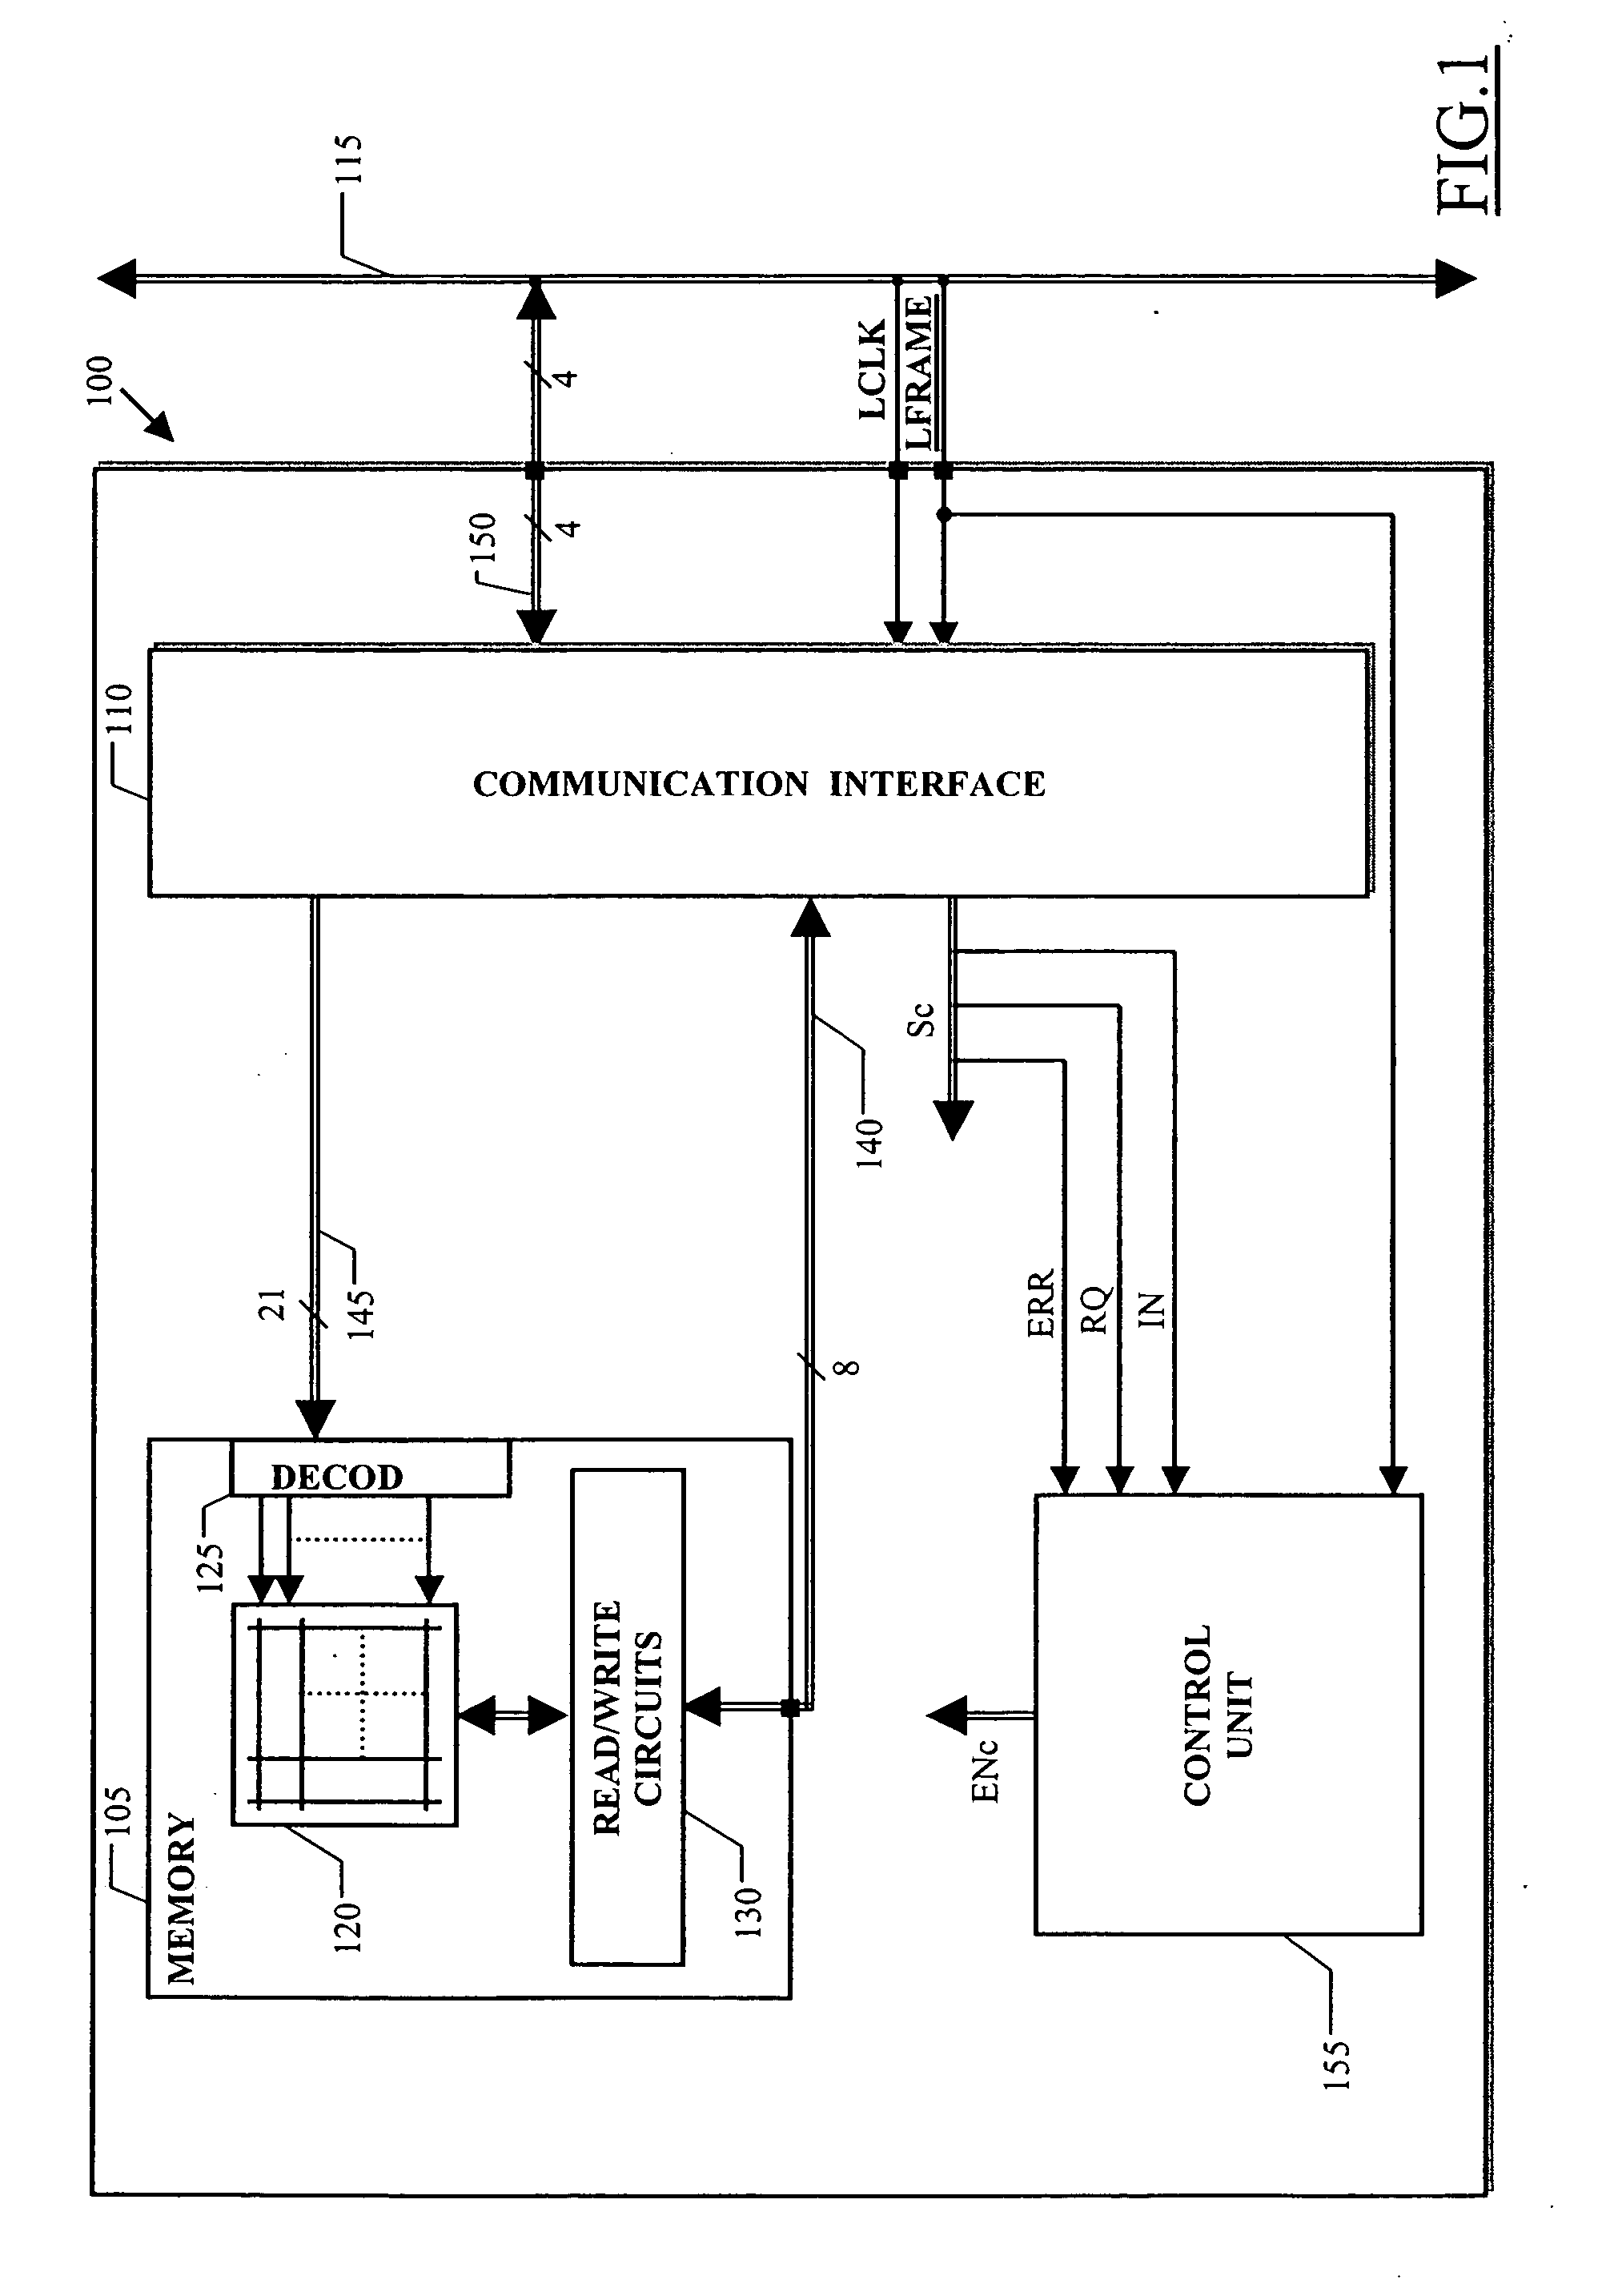 Synchronous memory device with reduced power consumption